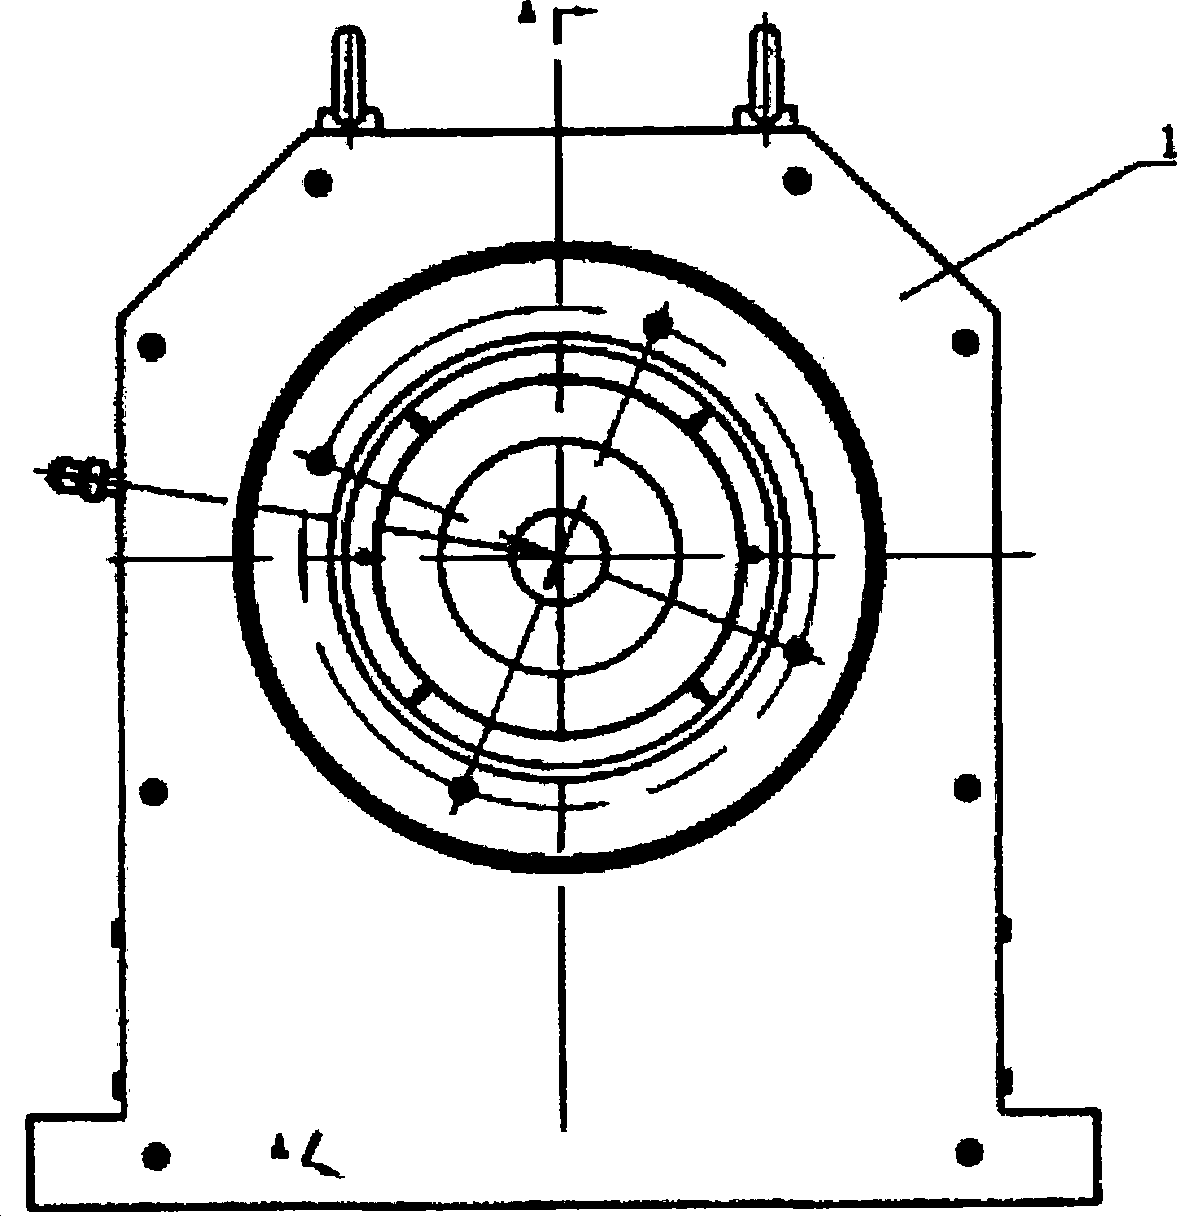 Double-end-face double-piston spindle for machine tool